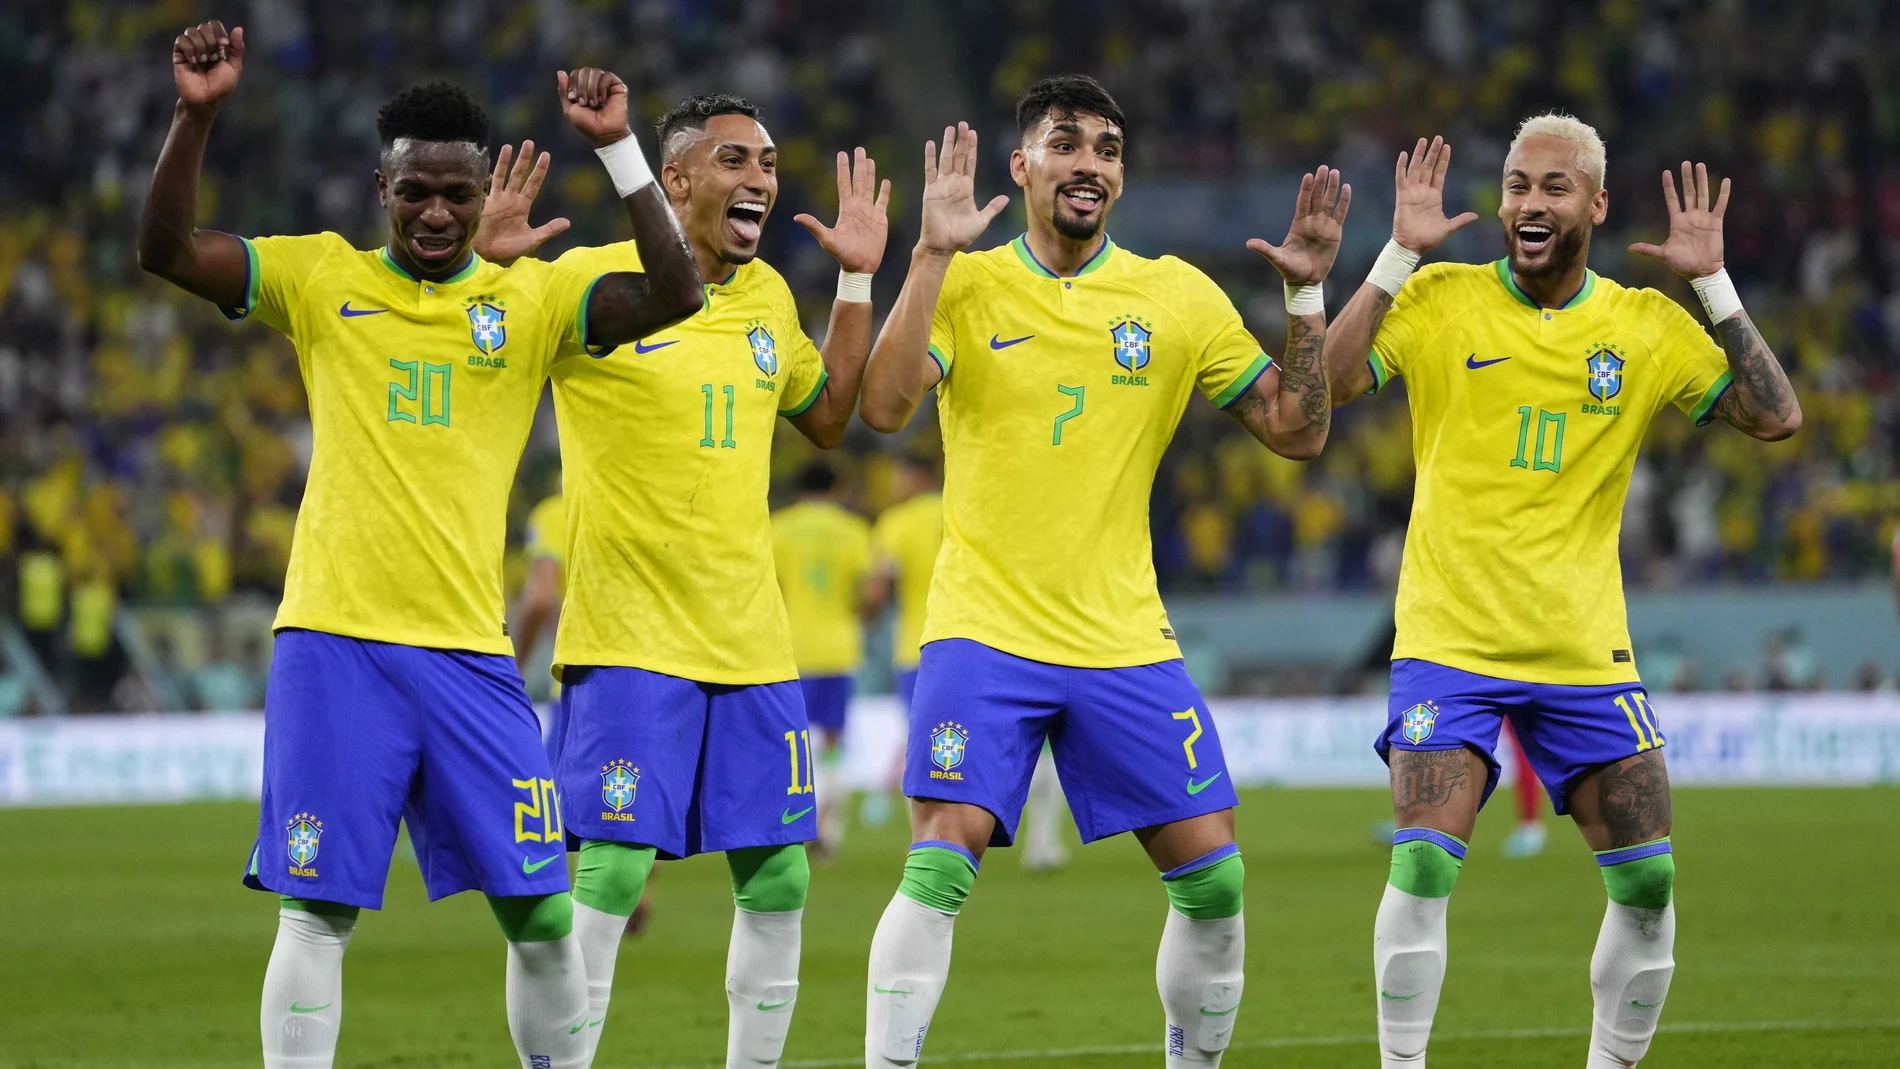 Brazil's Neymar, from right, celebrates with team mates Lucas Paqueta, Raphinha and Vinicius Junior after scoring his side's second goal during the World Cup round of 16 soccer match between Brazil and South Korea, at the Stadium 974 in Doha, Qatar, Monday, Dec. 5, 2022. (AP Photo/Manu Fernandez)